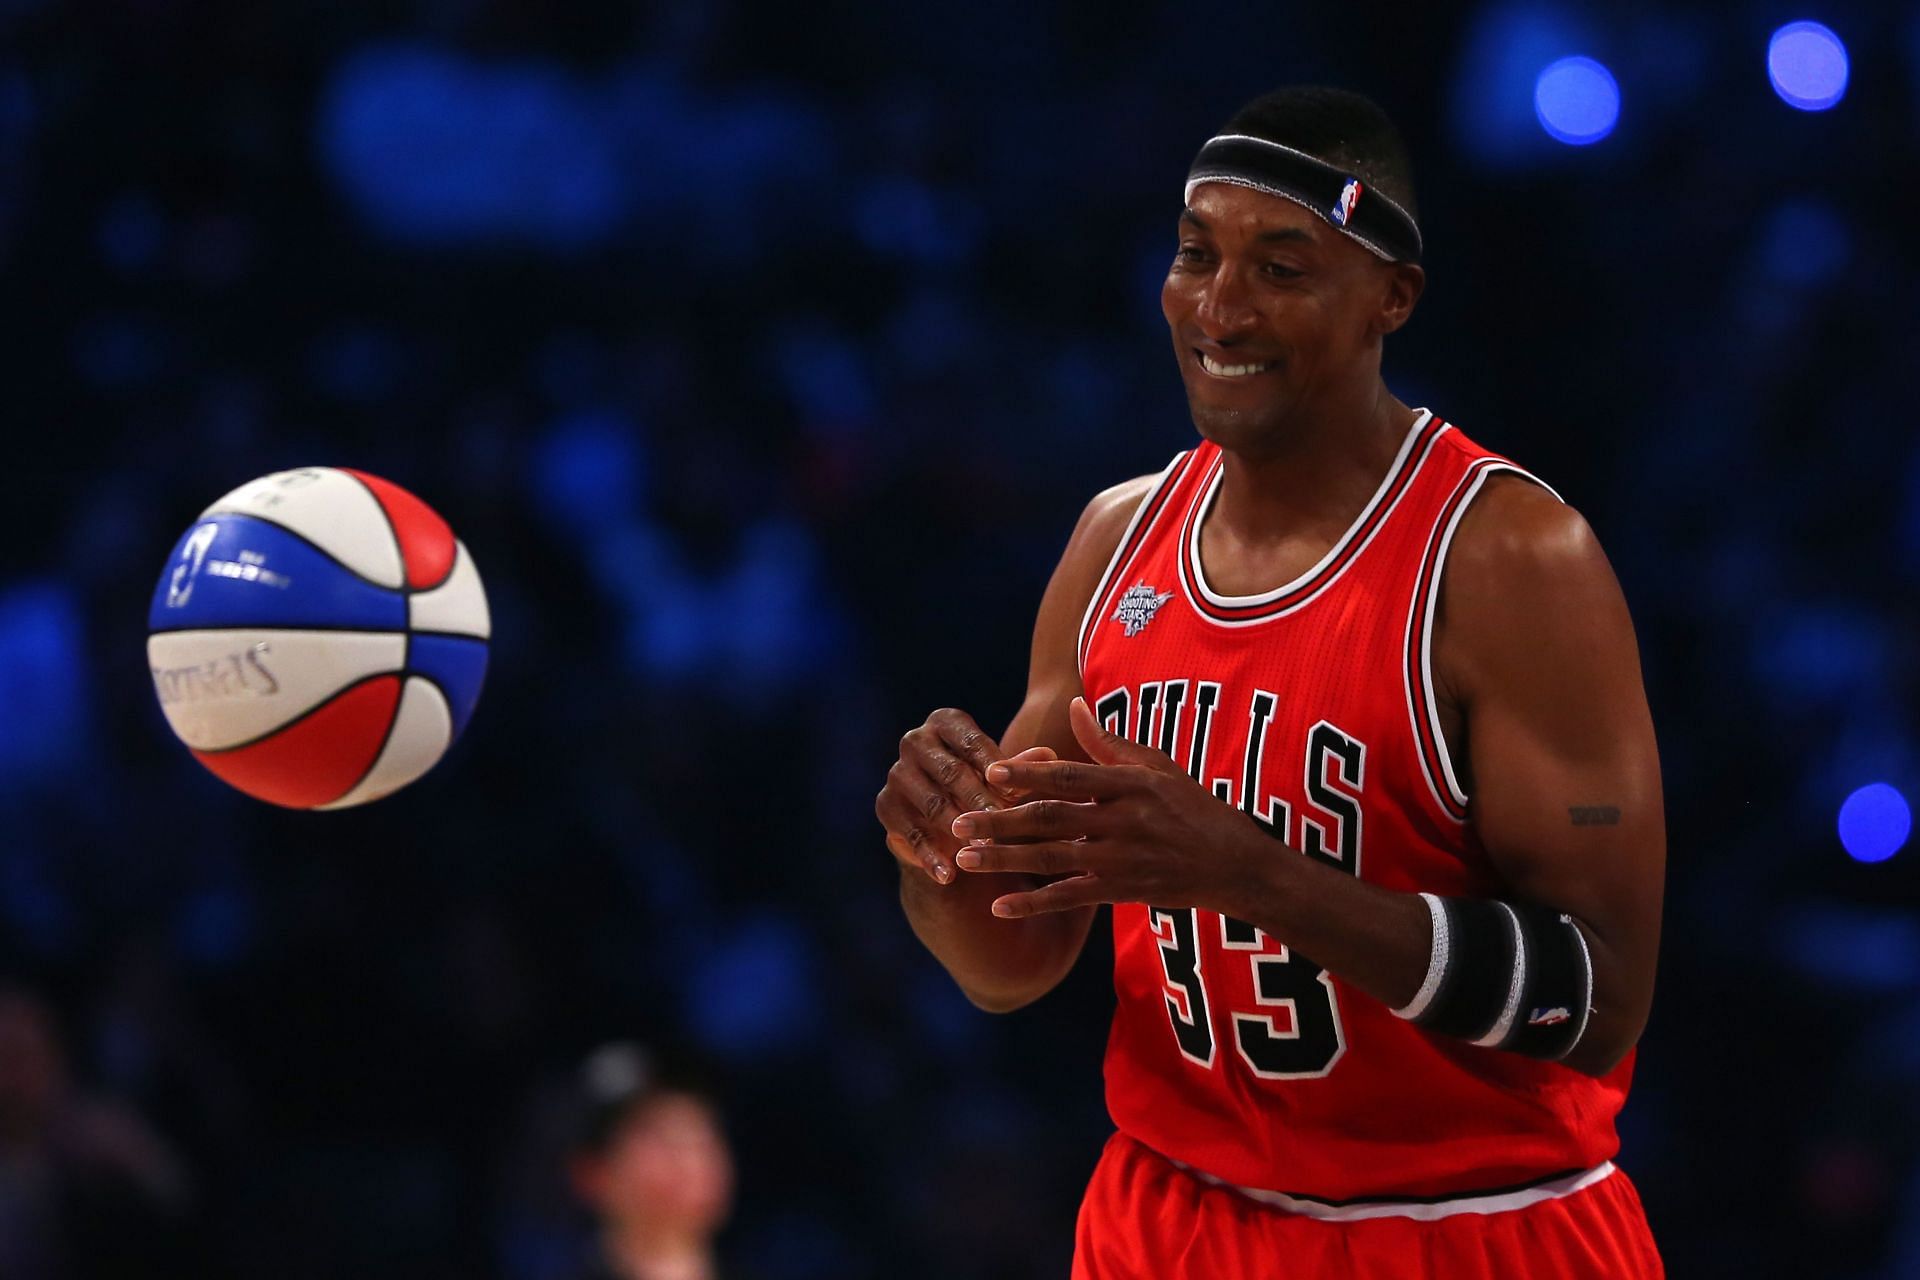 NBA Legend Scottie Pippen #33 competes during the Degree Shooting Stars Competition as part of the 2015 NBA Allstar Weekend at Barclays Center on February 14, 2015 in the Brooklyn borough of New York City.